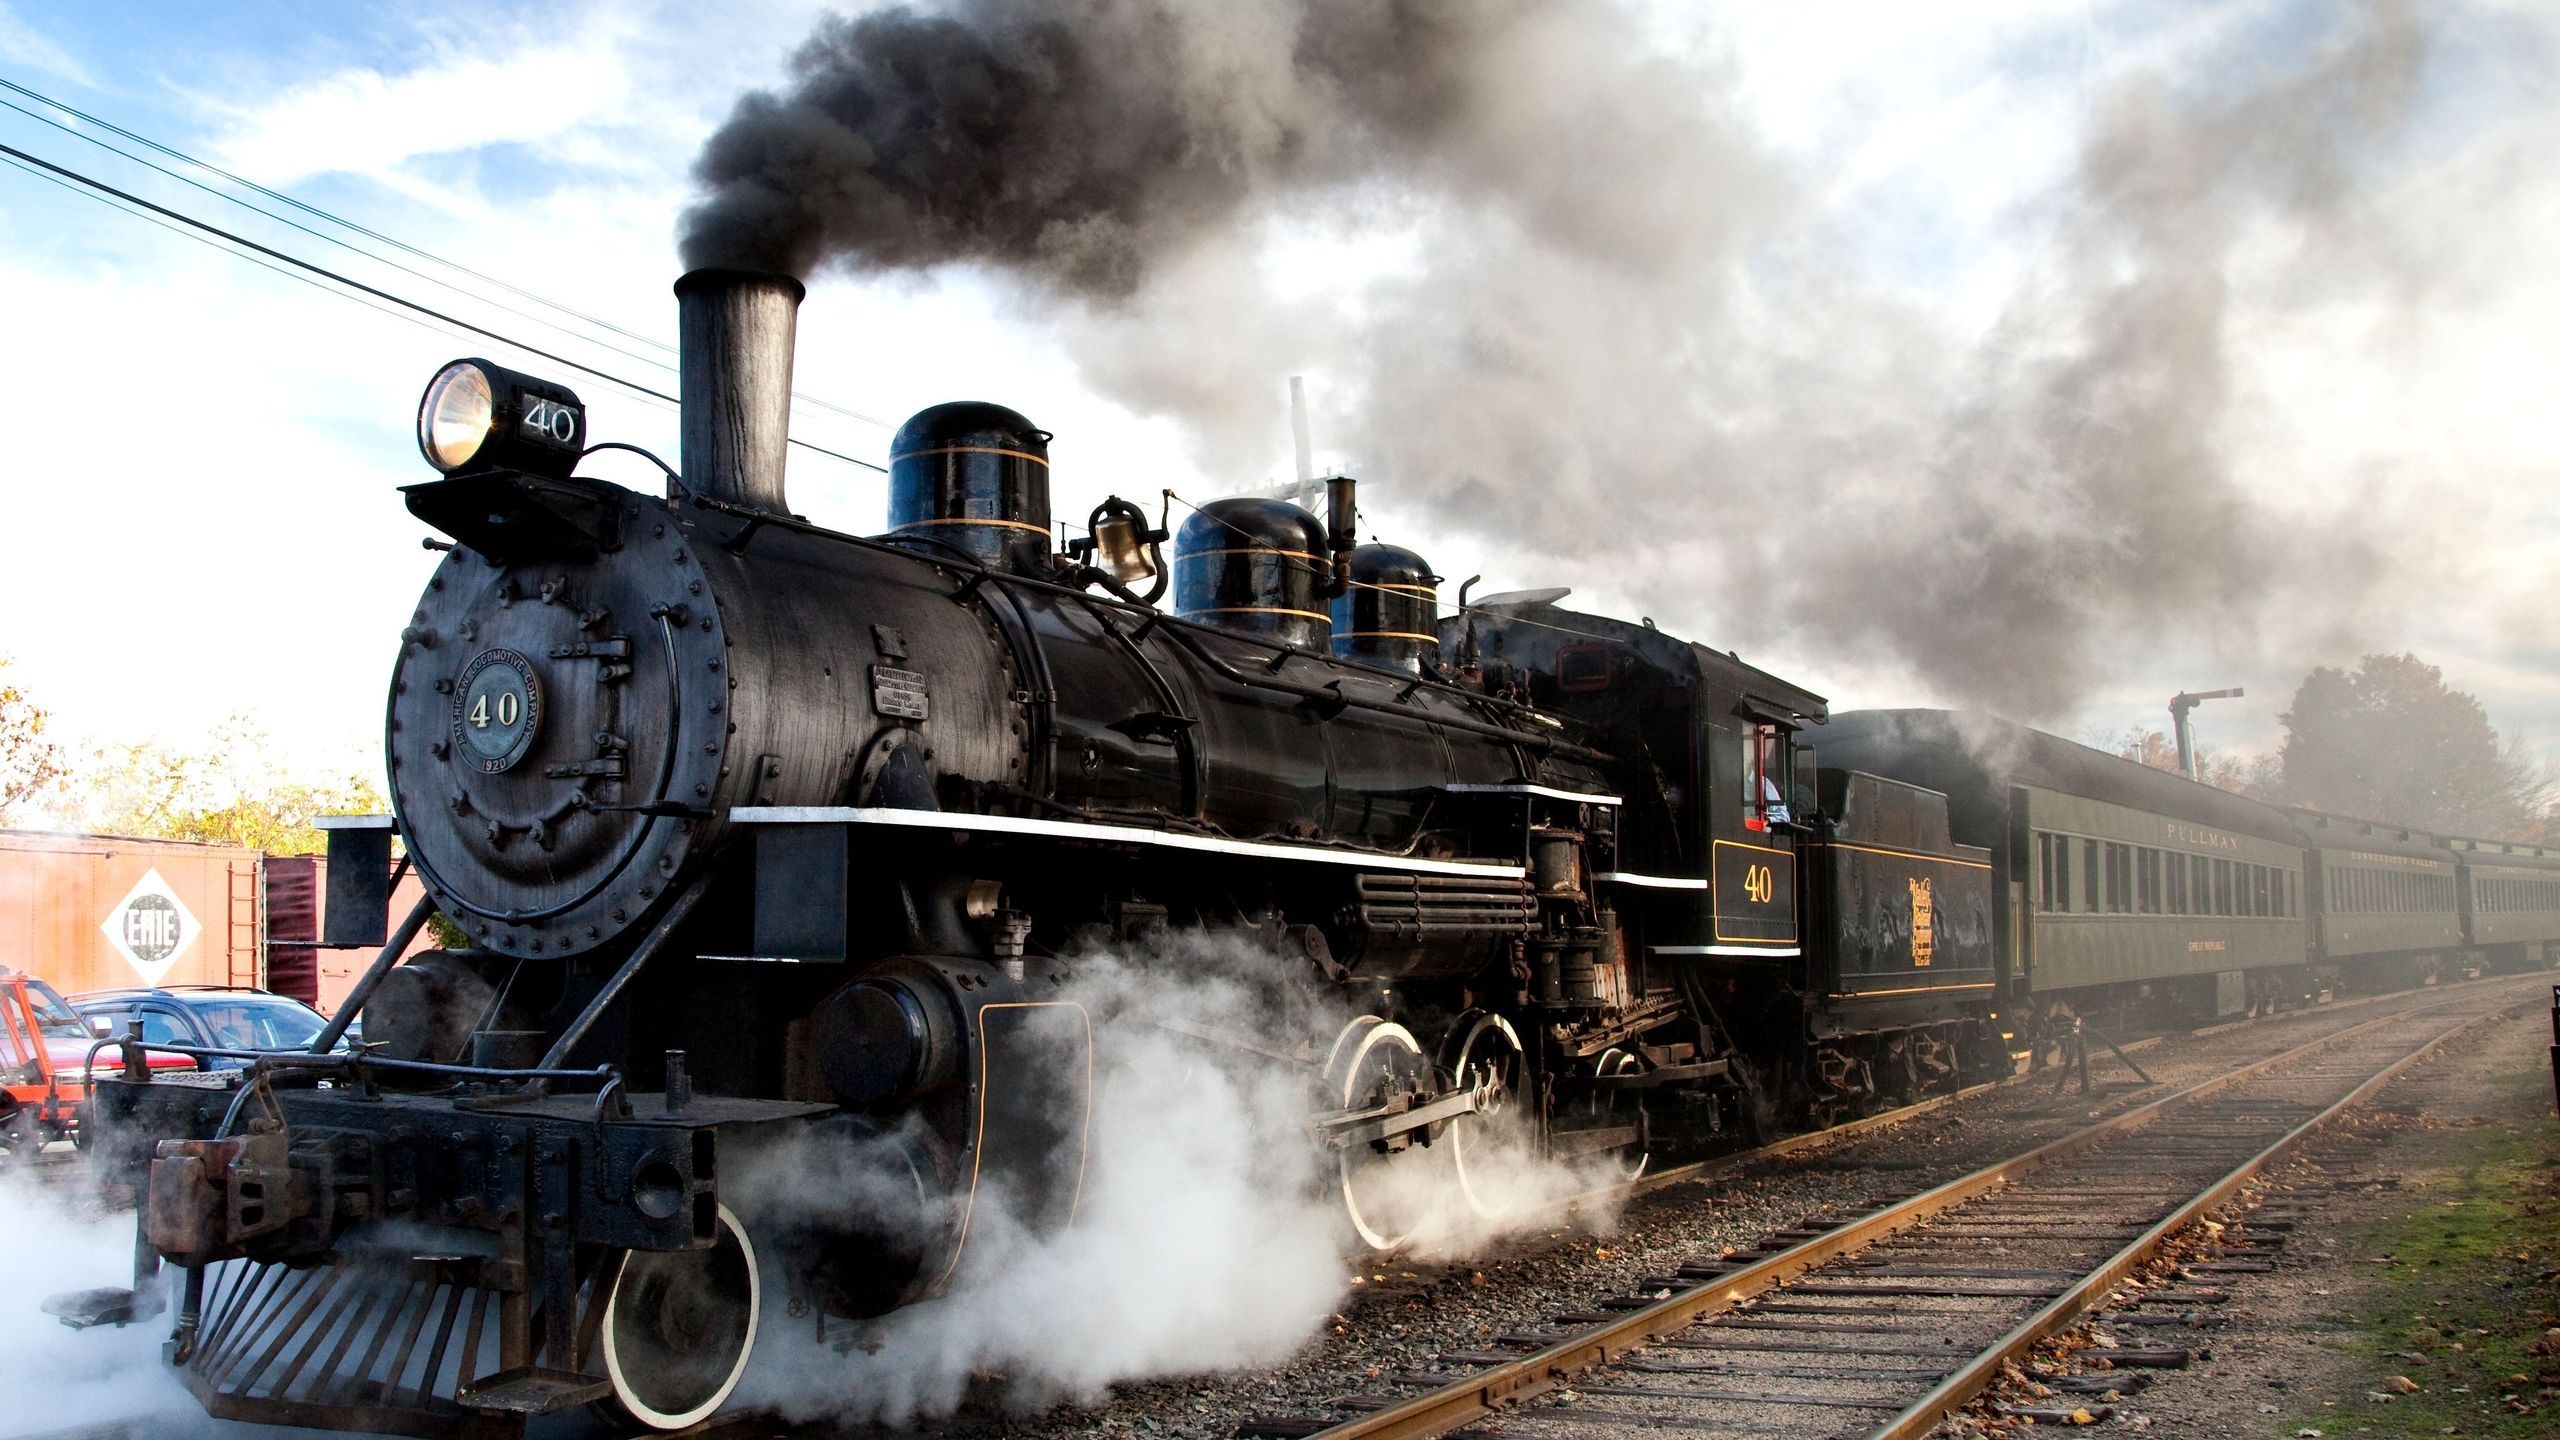 Old Steam Train for 2560x1440 HDTV resolution